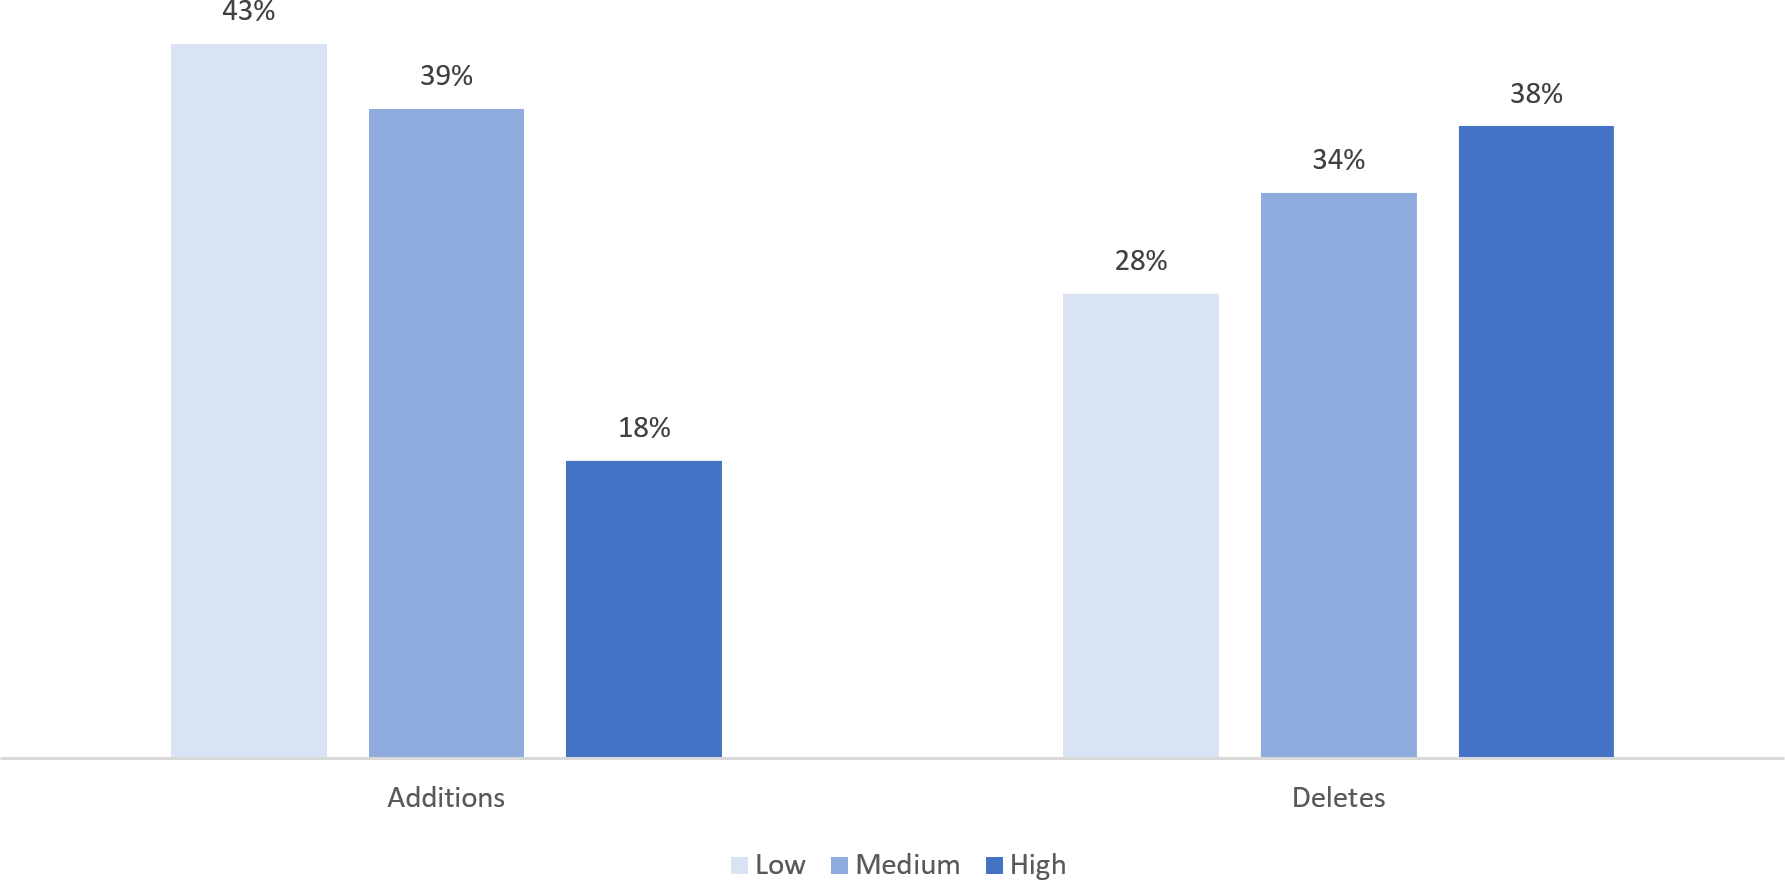 Bar chart showing Proportion of Supplemental Diagnosis Codes that are in Low, Medium, and High Failure Rate Groups